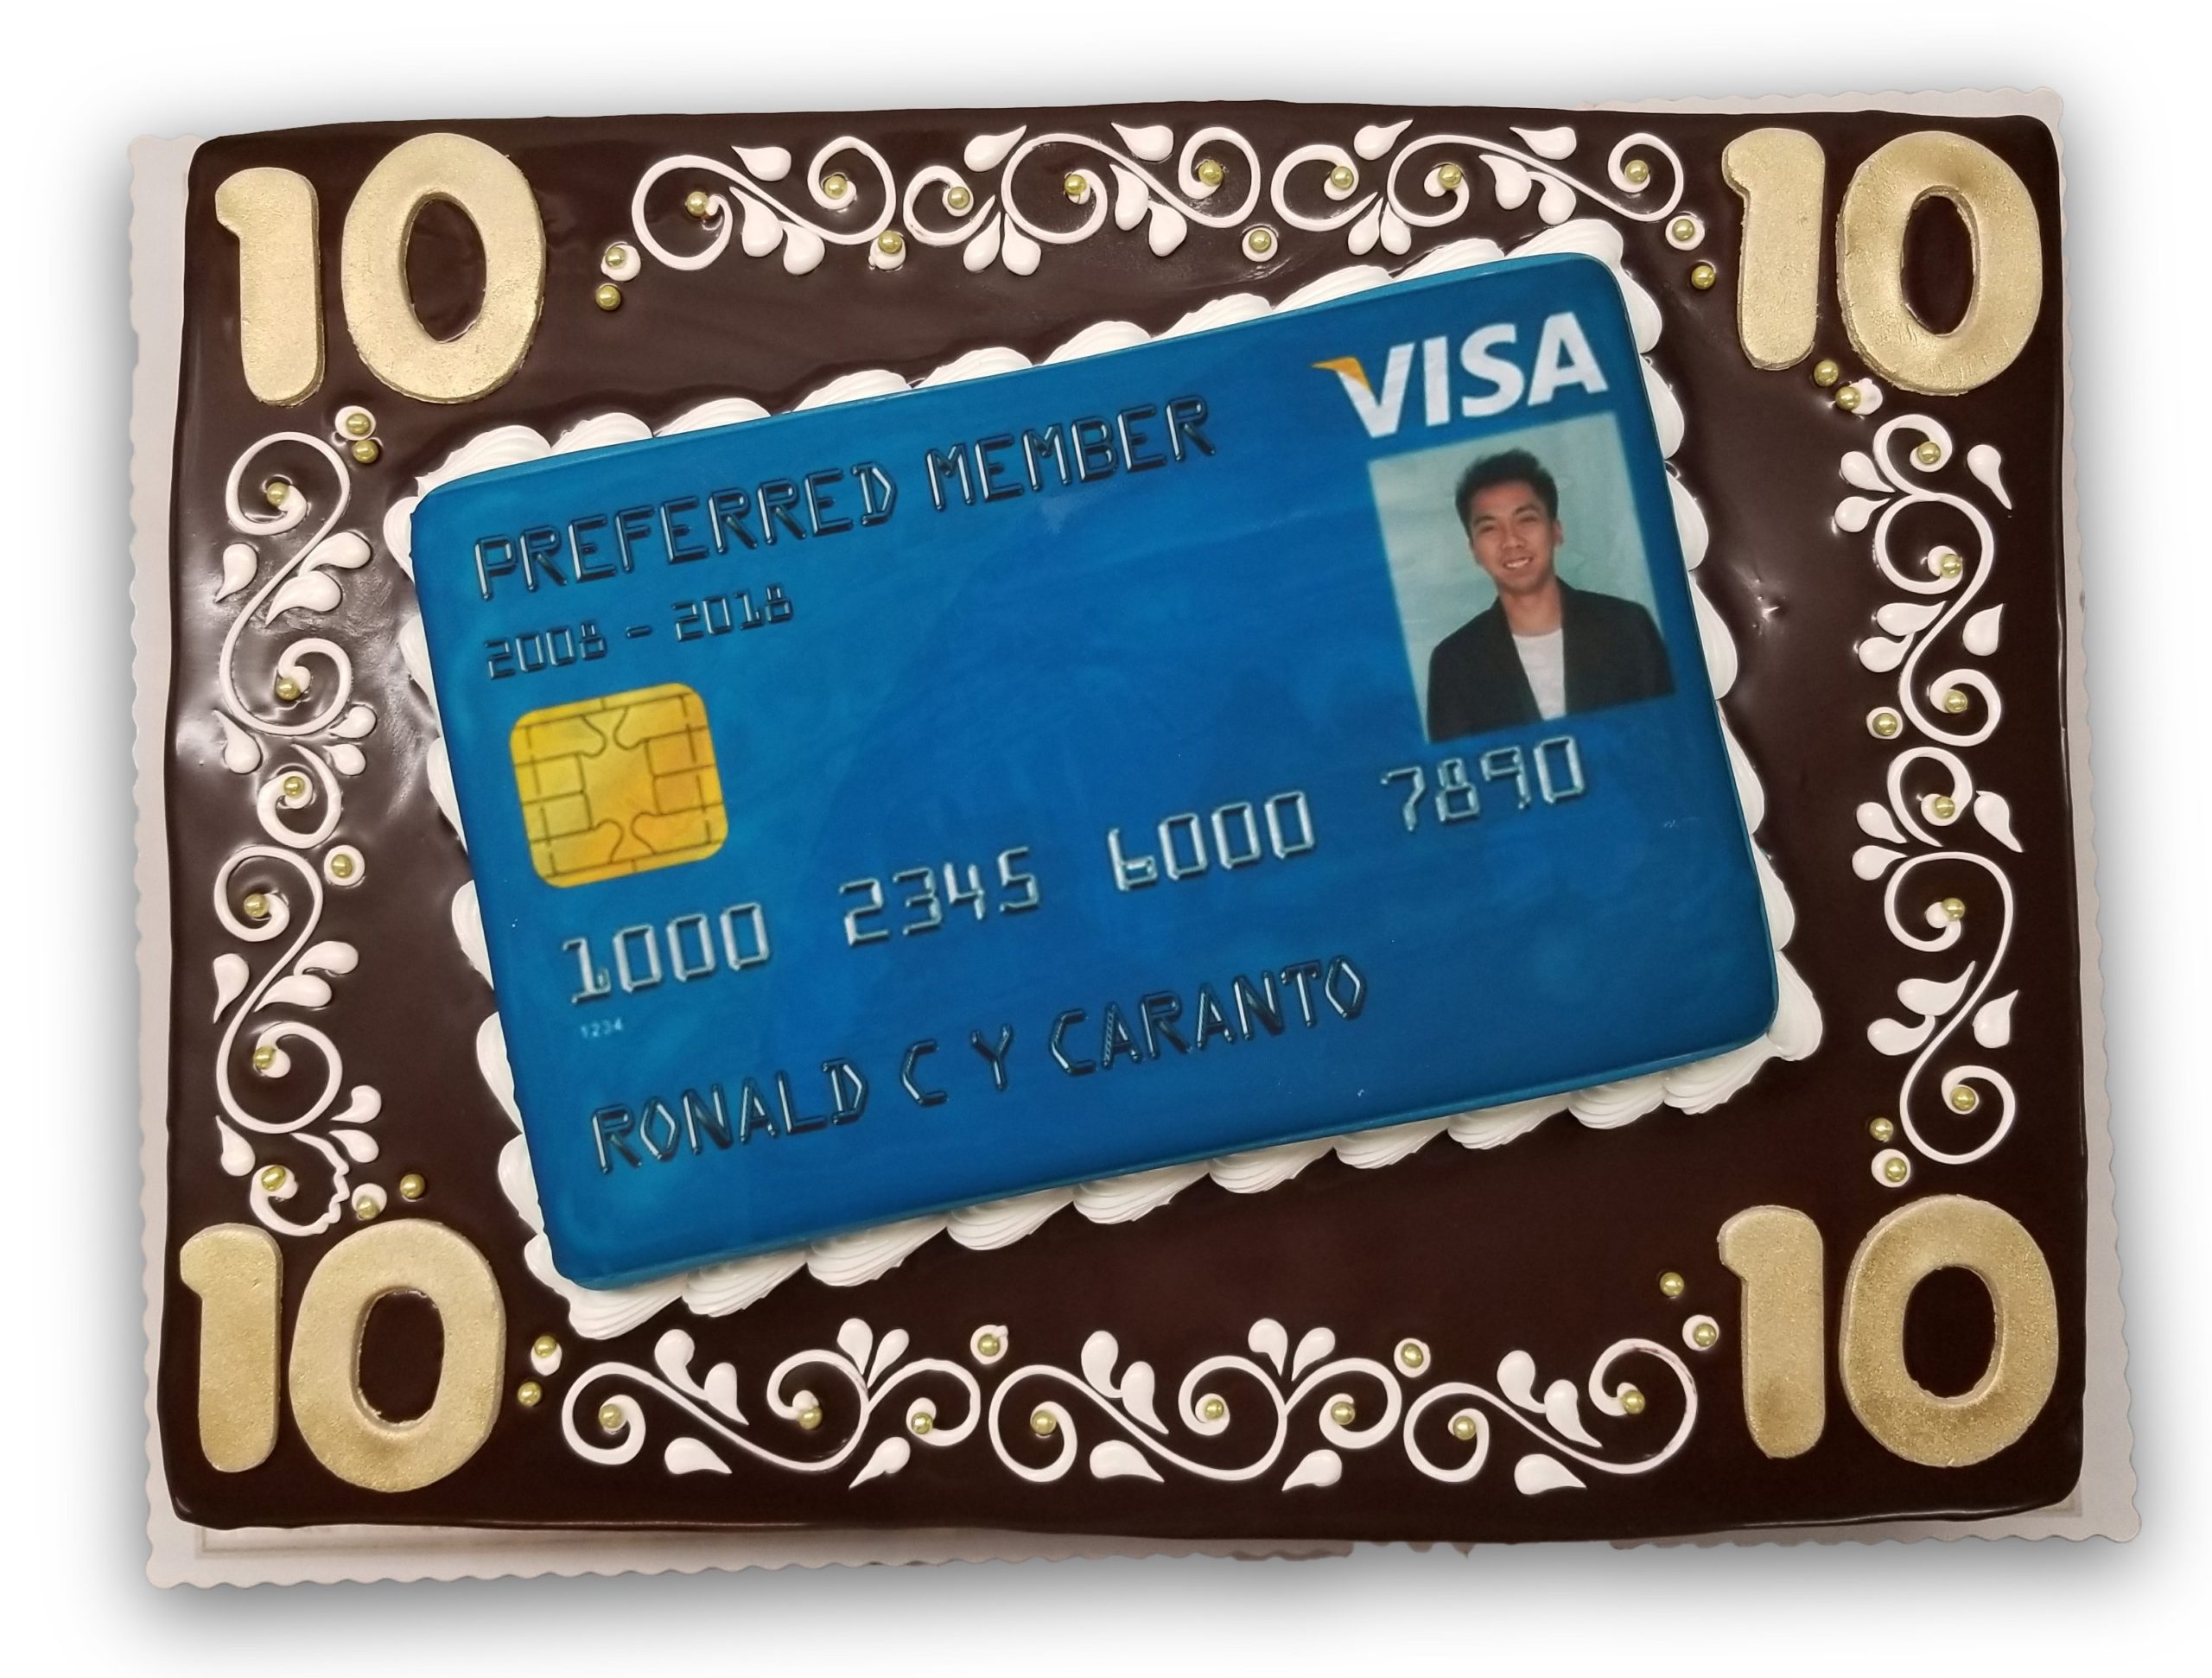 10 year workiversary cake with scanned visa card image